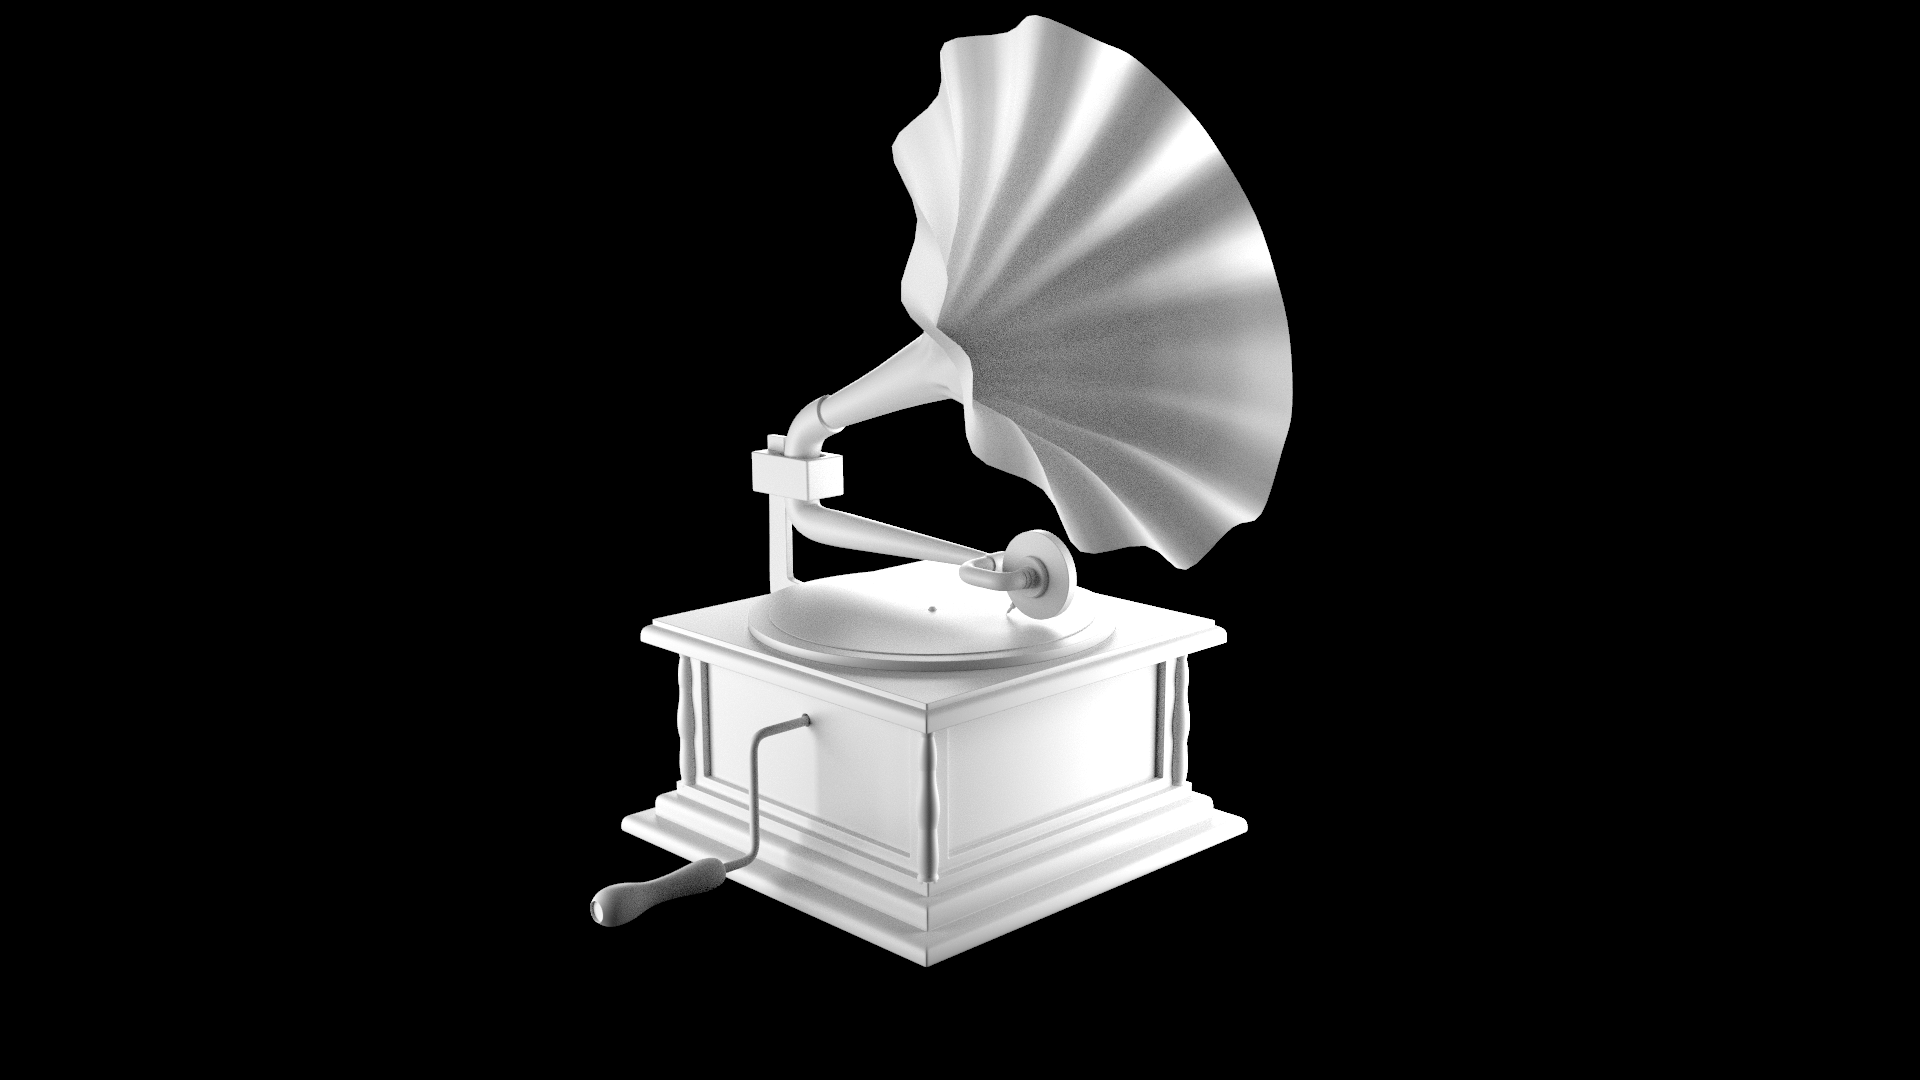 3D model showing a gramophone recreated to reference.